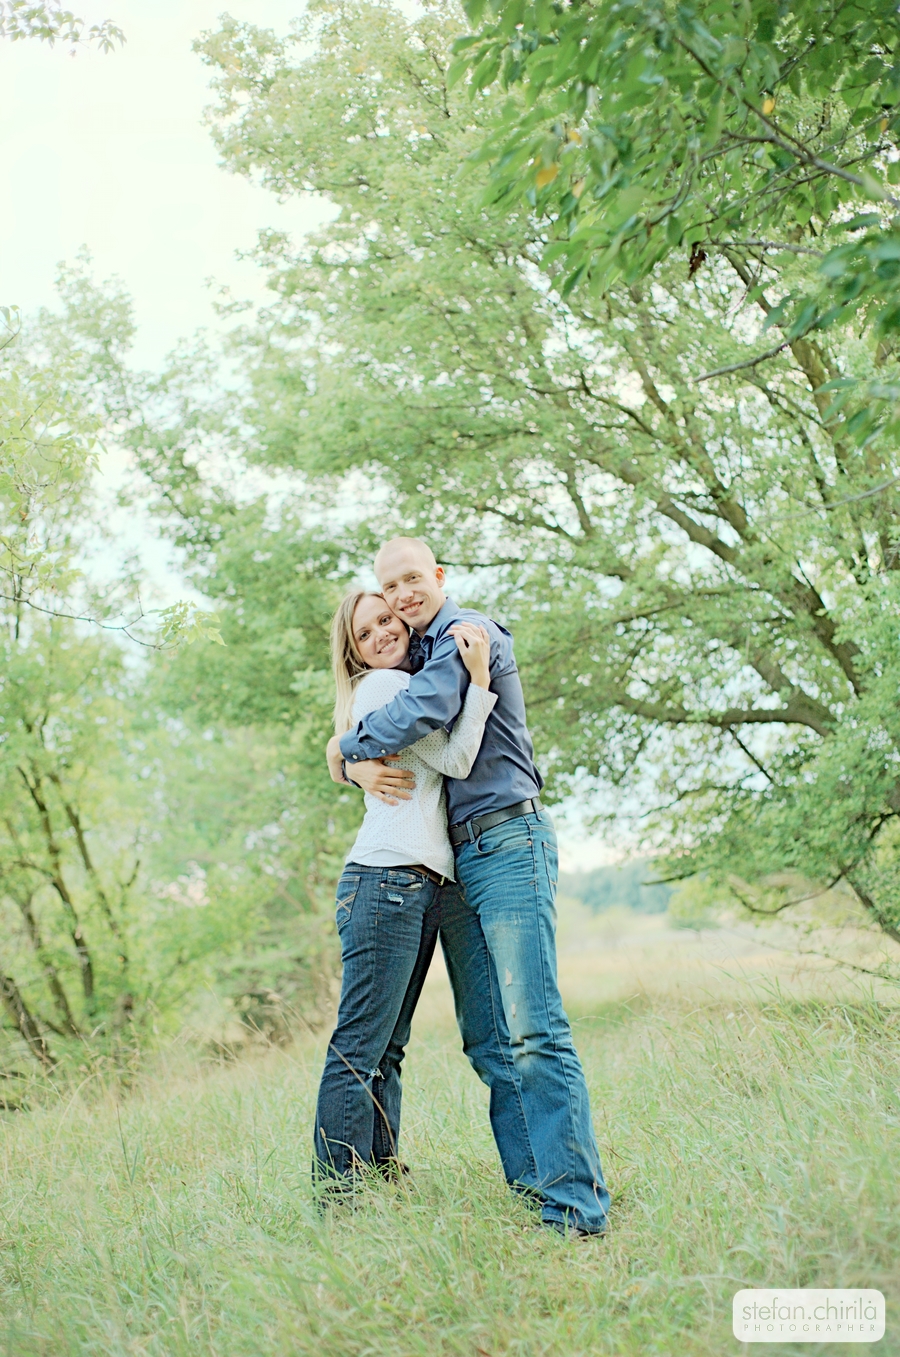 Michael and Rebekah Engagement Photography by Stefan Chirila